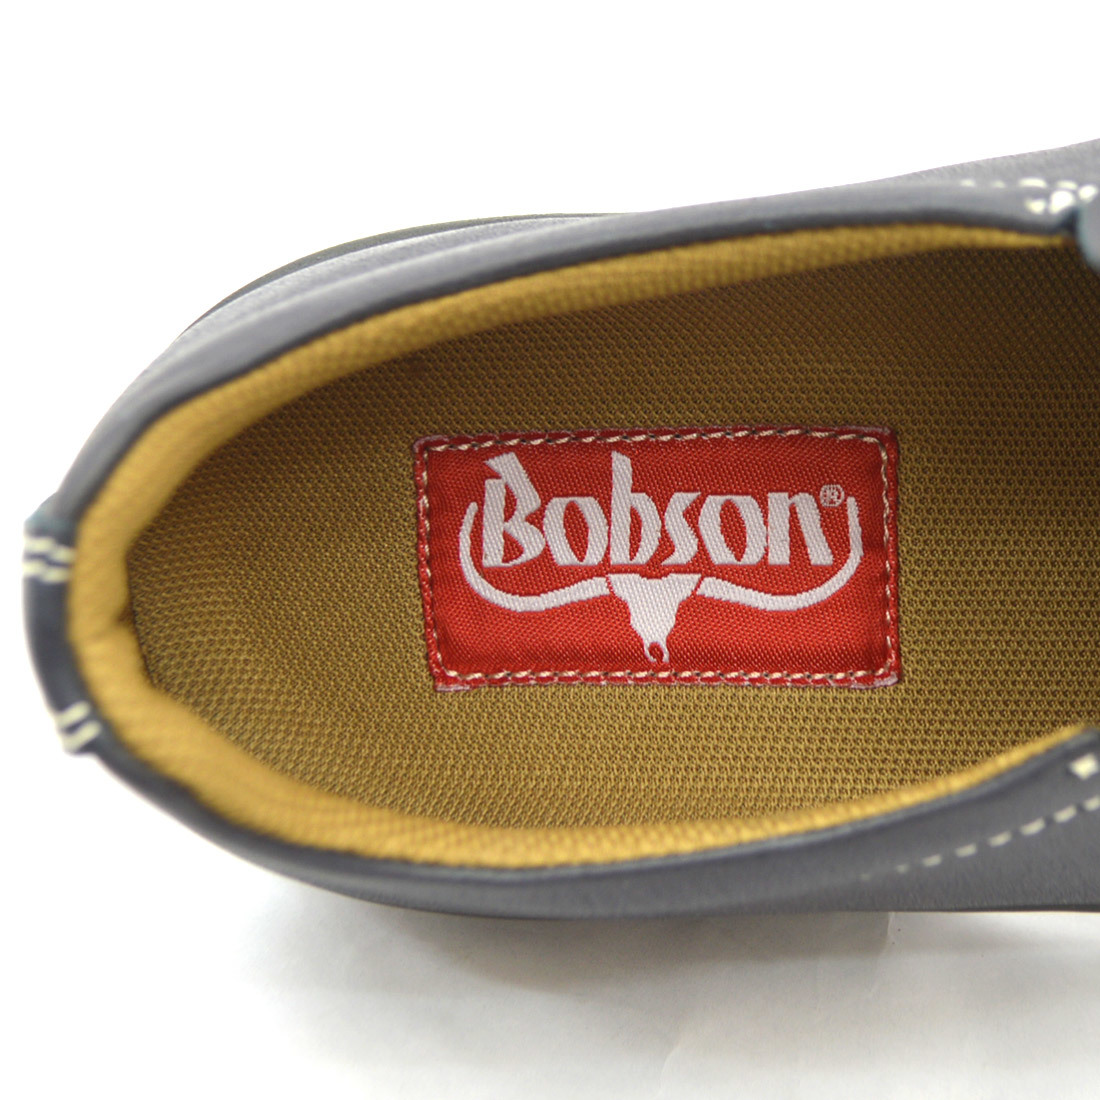 ^BOBSON Bobson casual shoes walking slip-on shoes 4509 original leather made in Japan Brown Brown tea 25.5cm (0910010564-br-s255)